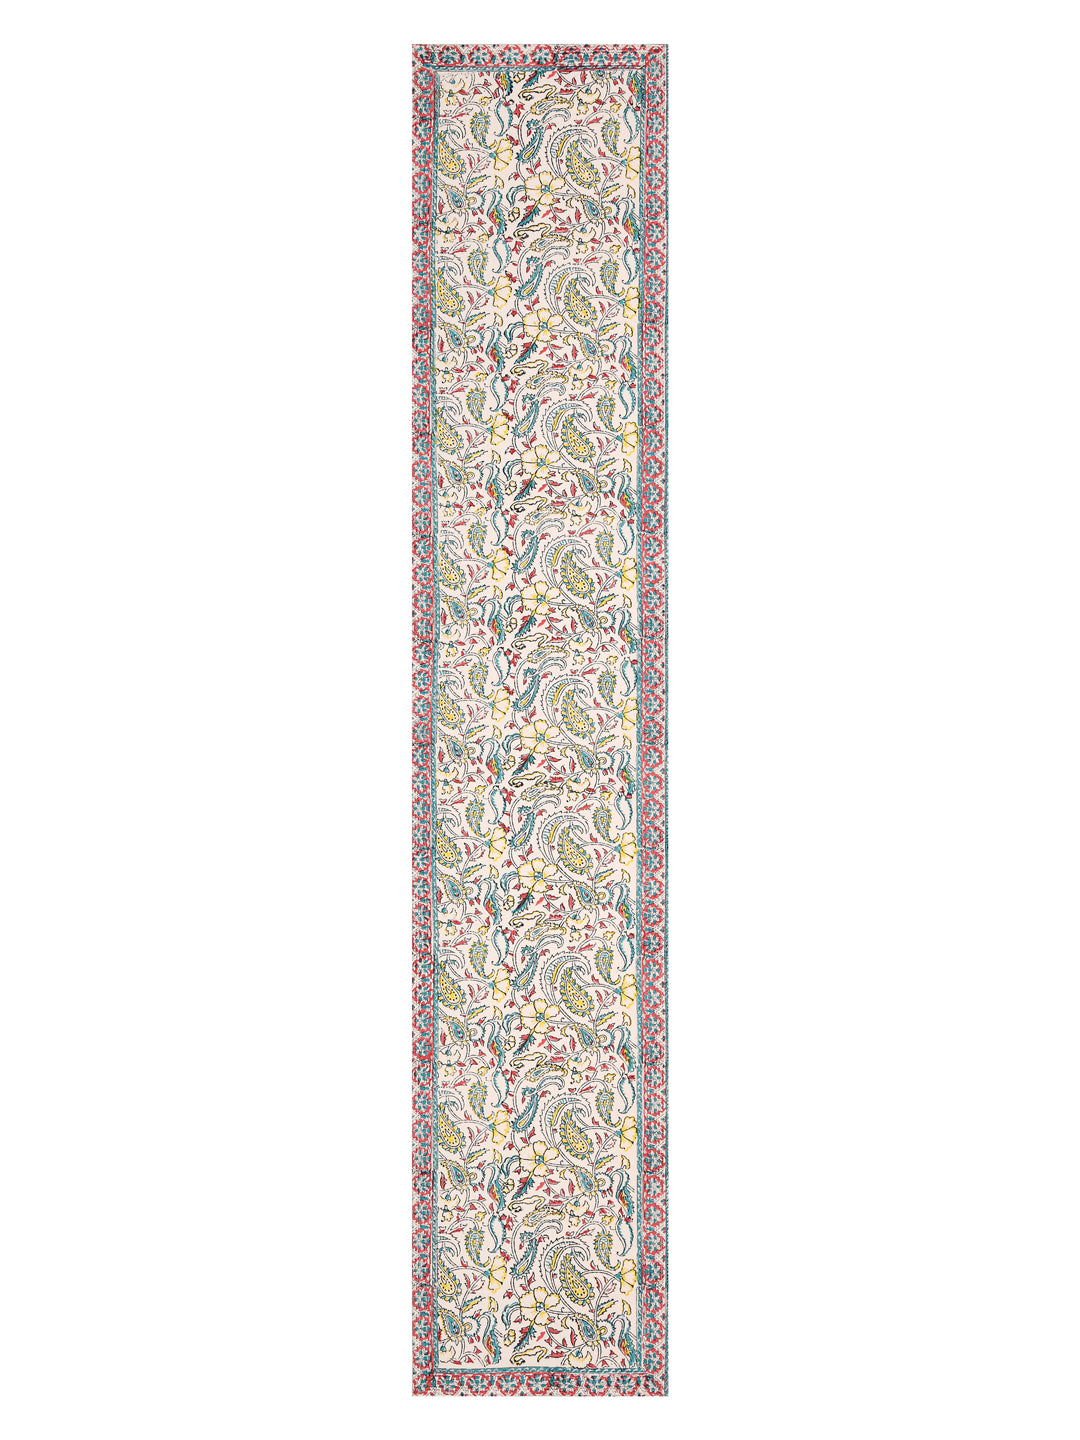 Table Runner; 13x70 Inches; Multicolor Leaves